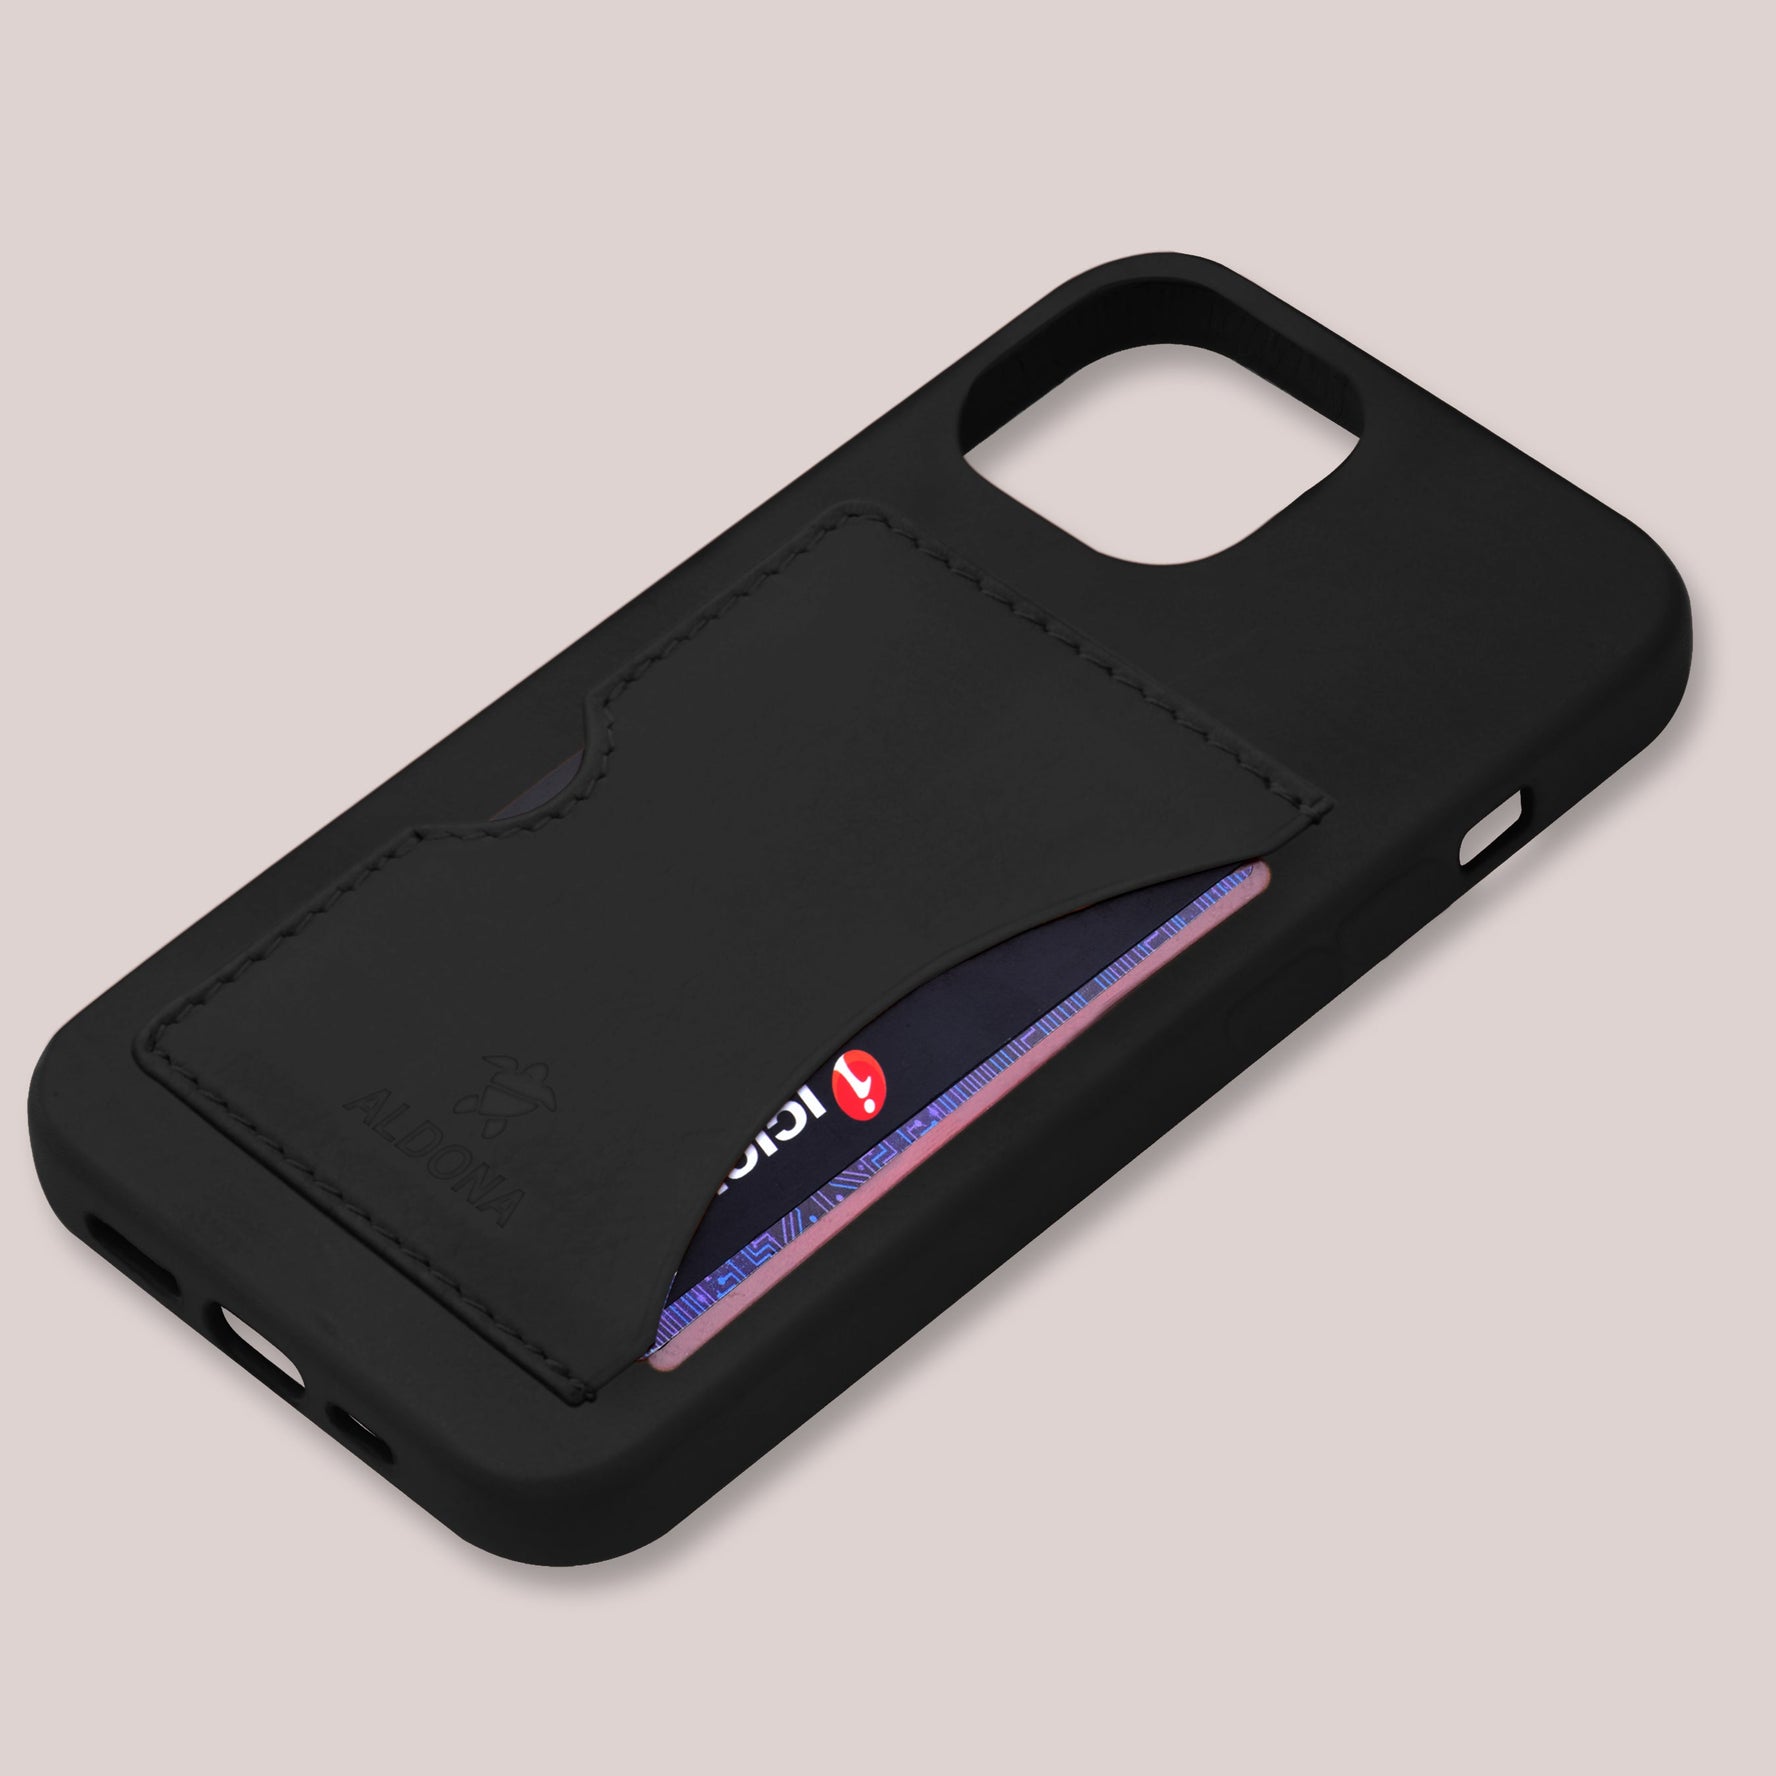 Baxter Card Case for iPhone 14 Pro Max - Onyx Black